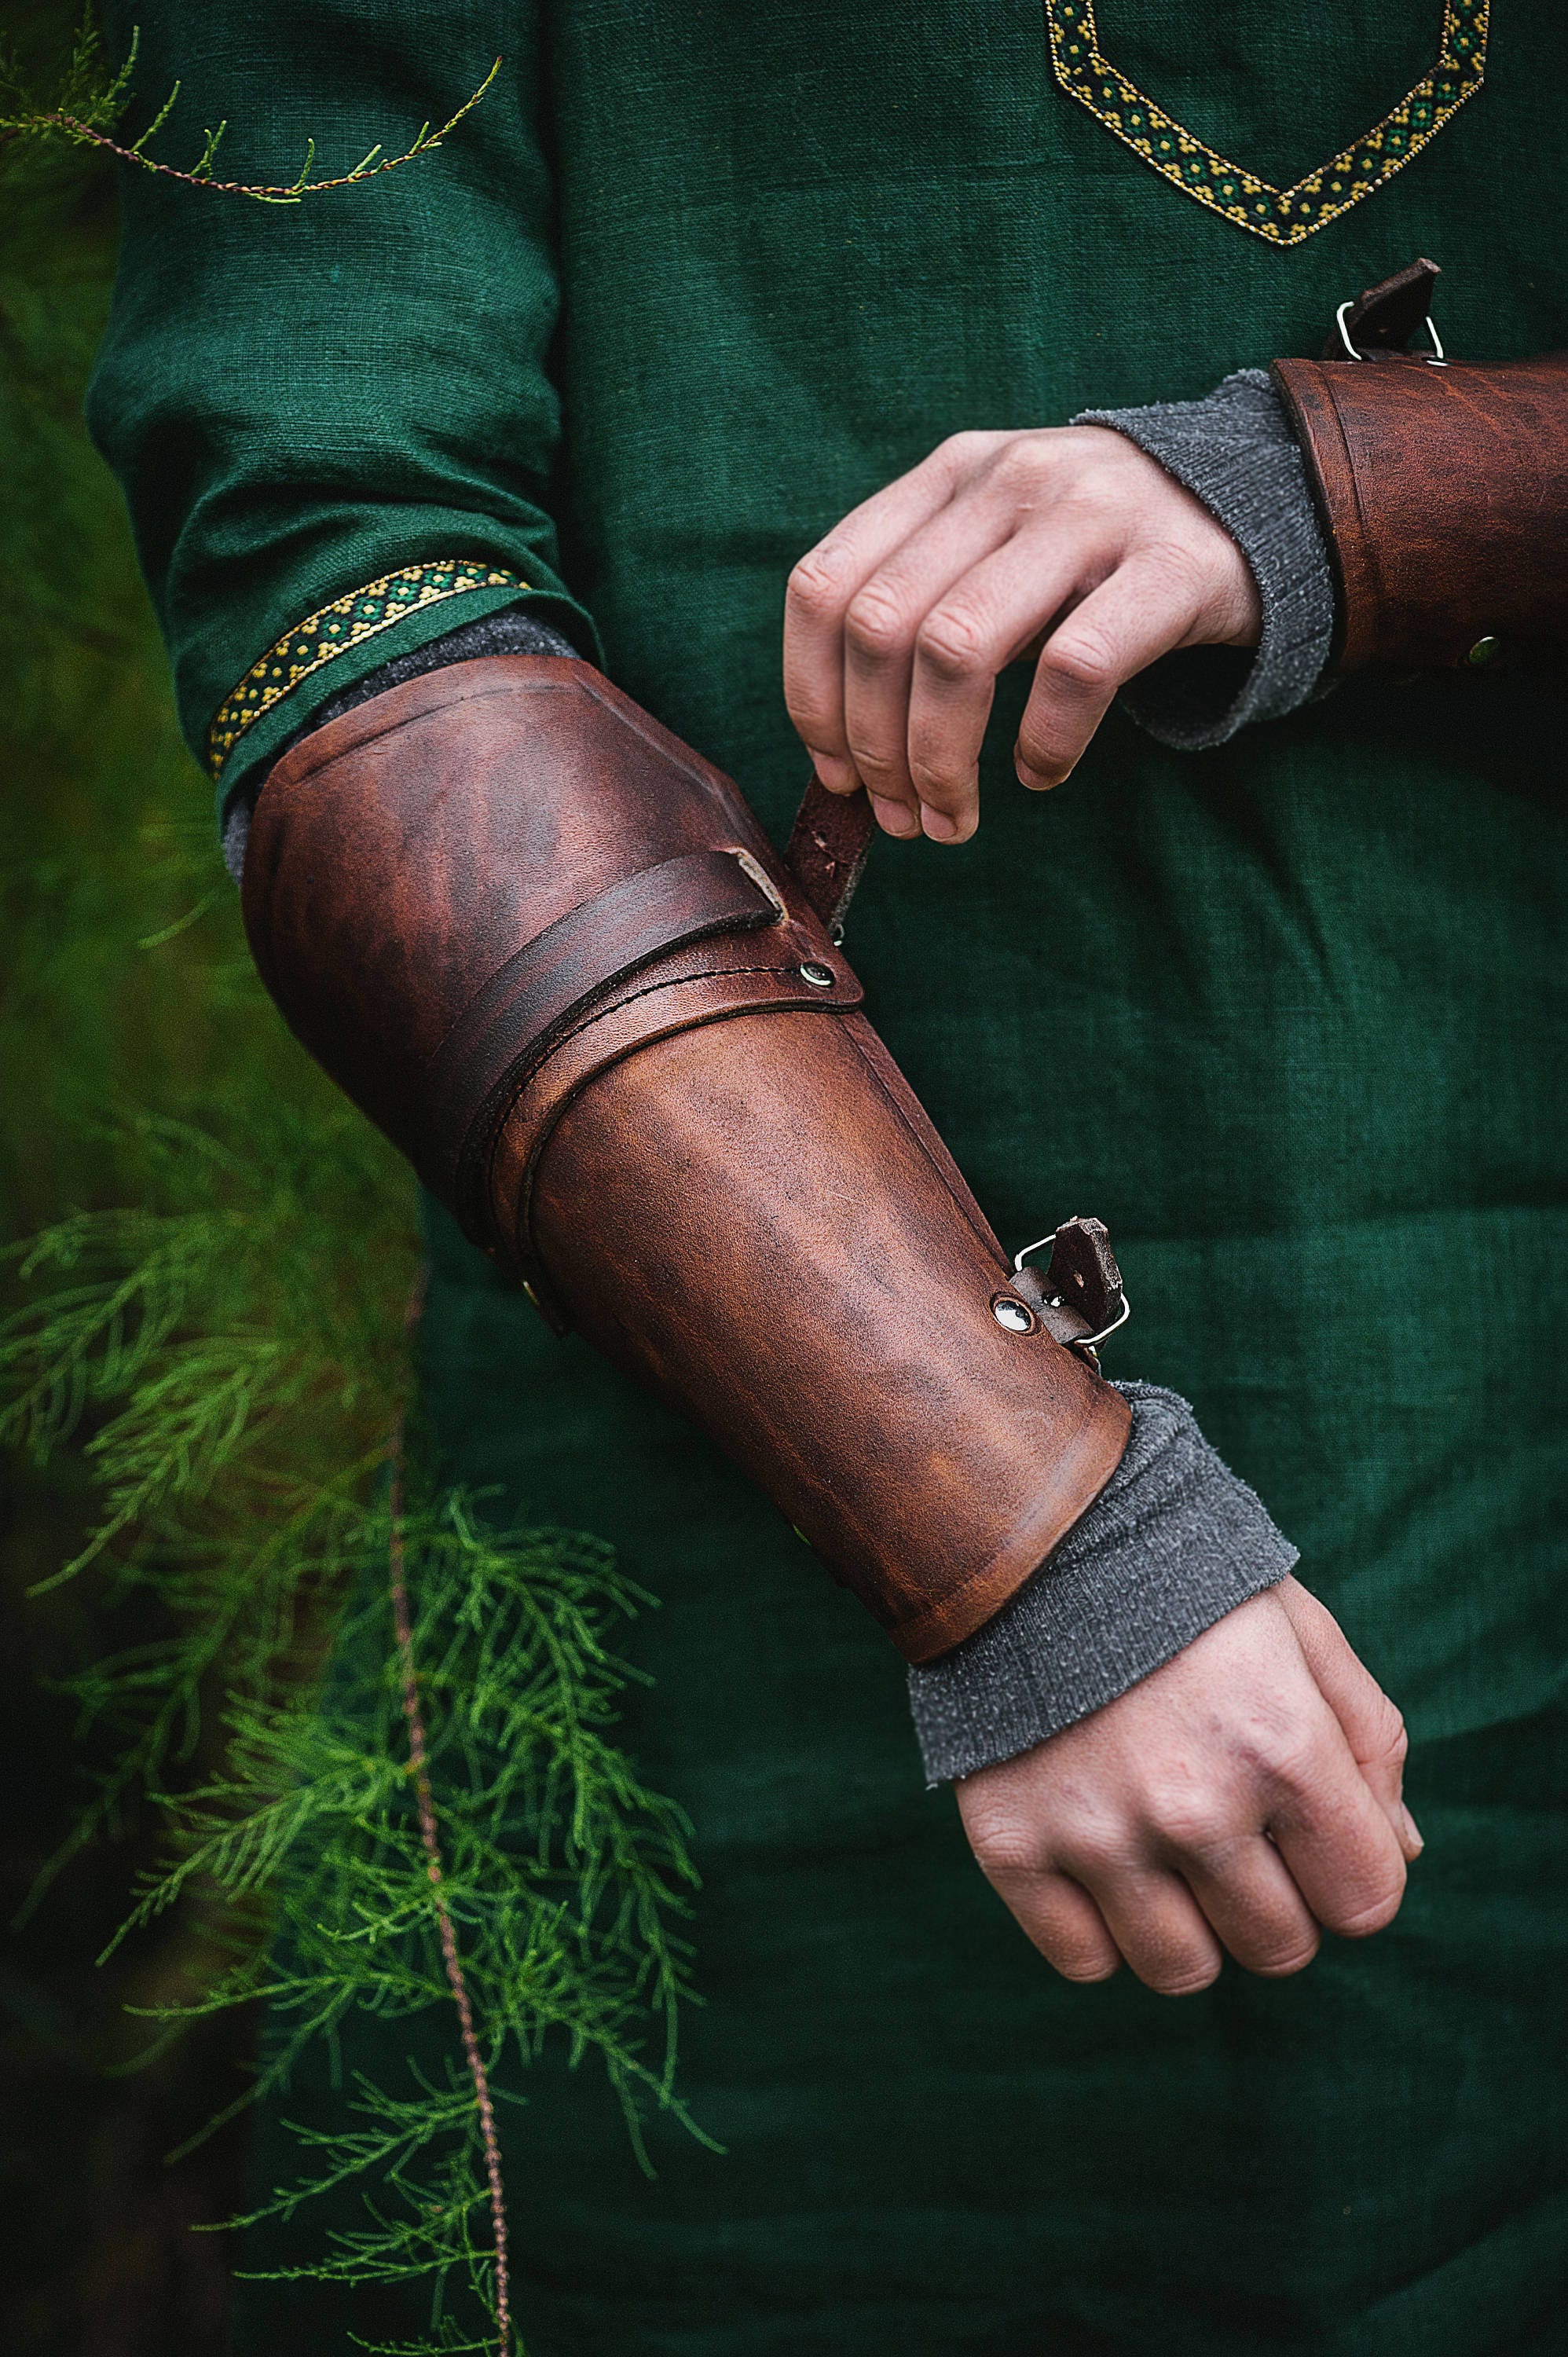 Two Leather Bracers, Cosplay Costume, Barbarian Larp Clothing, Fantasy  Warrior, Medieval Knight 